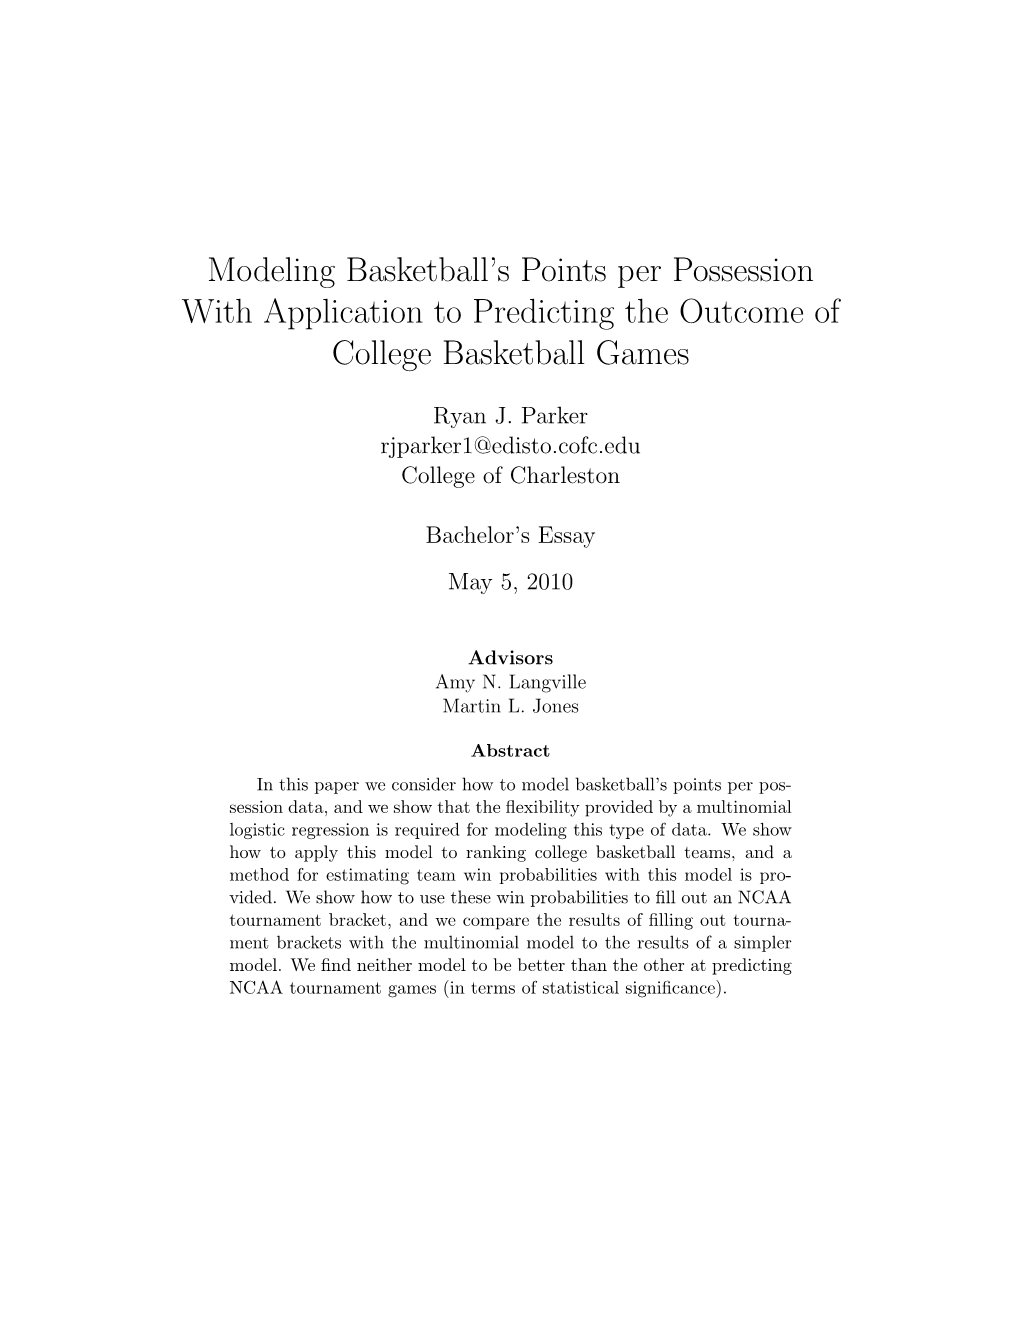 Modeling Basketball's Points Per Possession with Application To